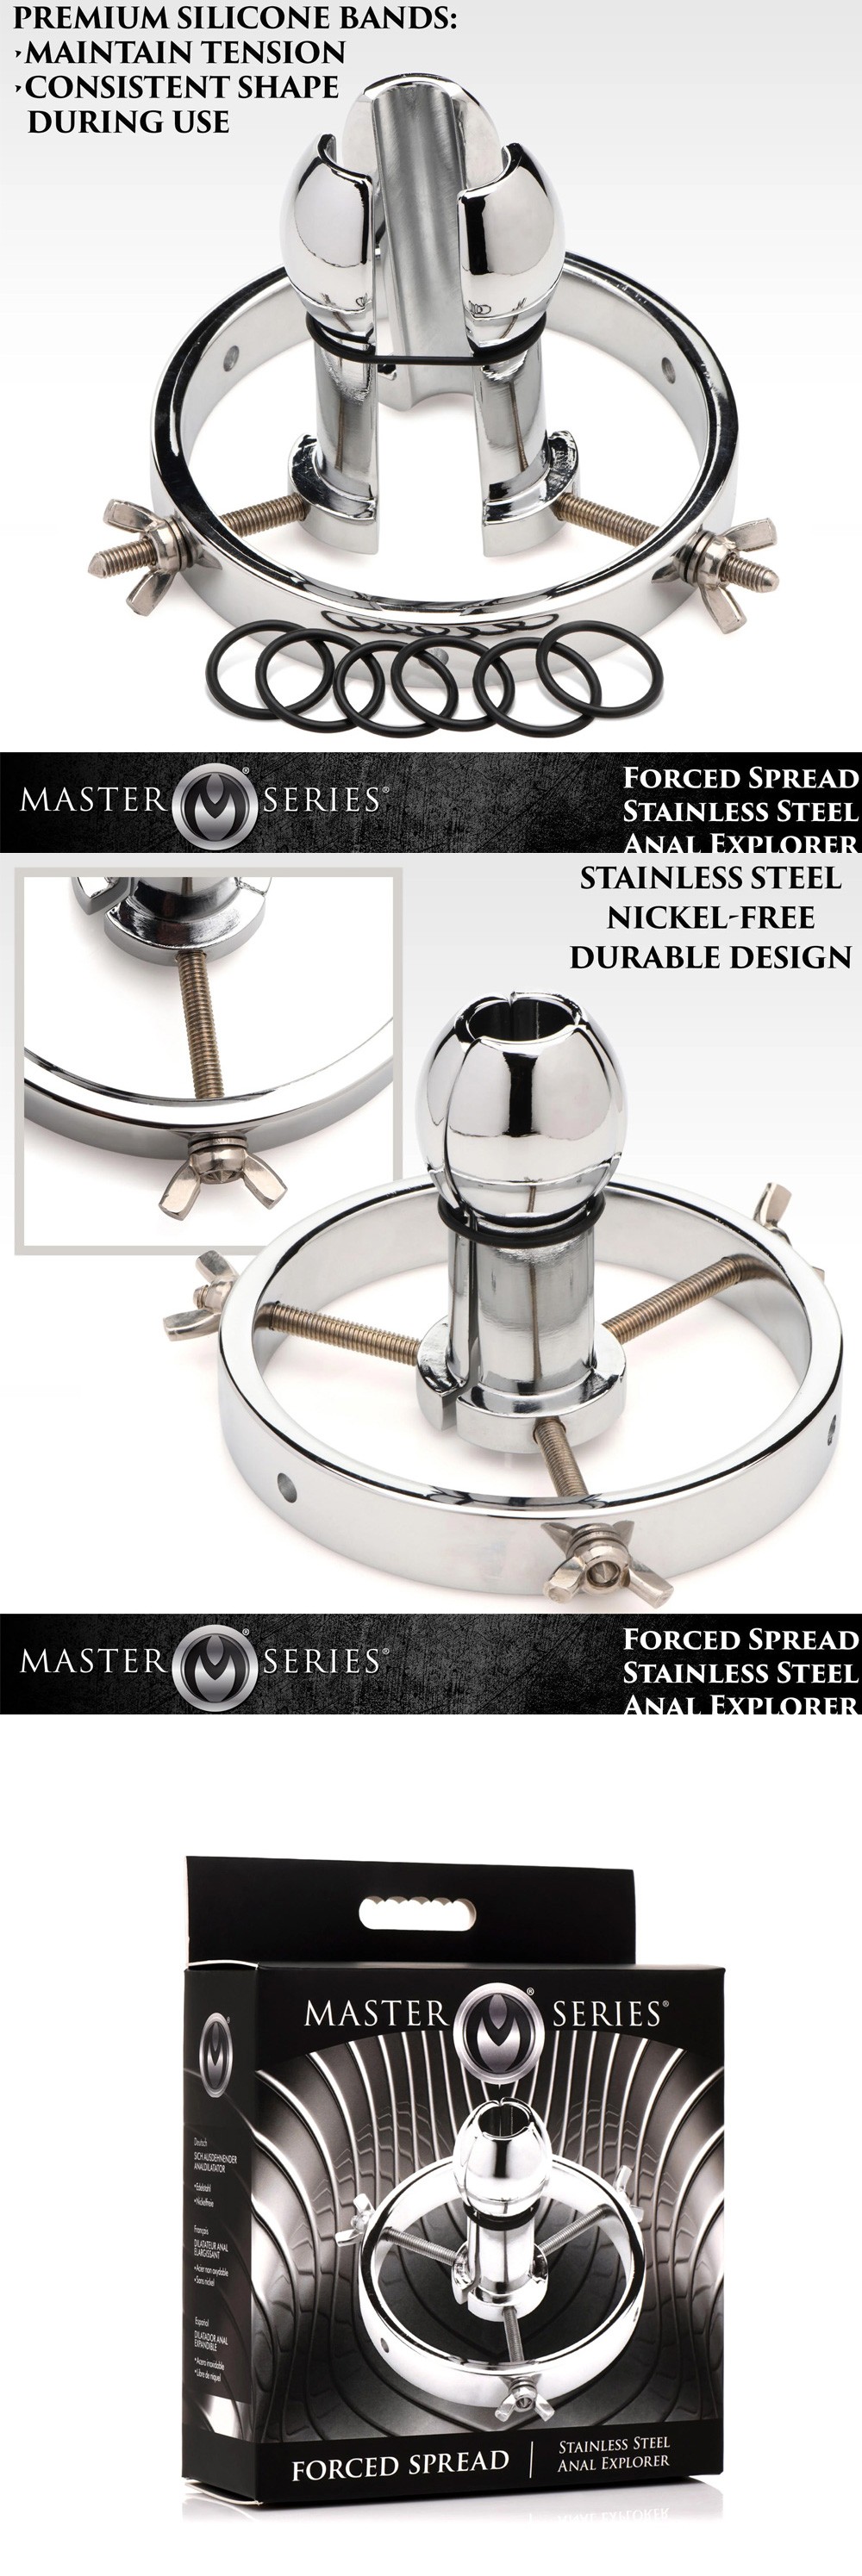 Master Series Forced Spread Stainless Steel Anal Explorer ss